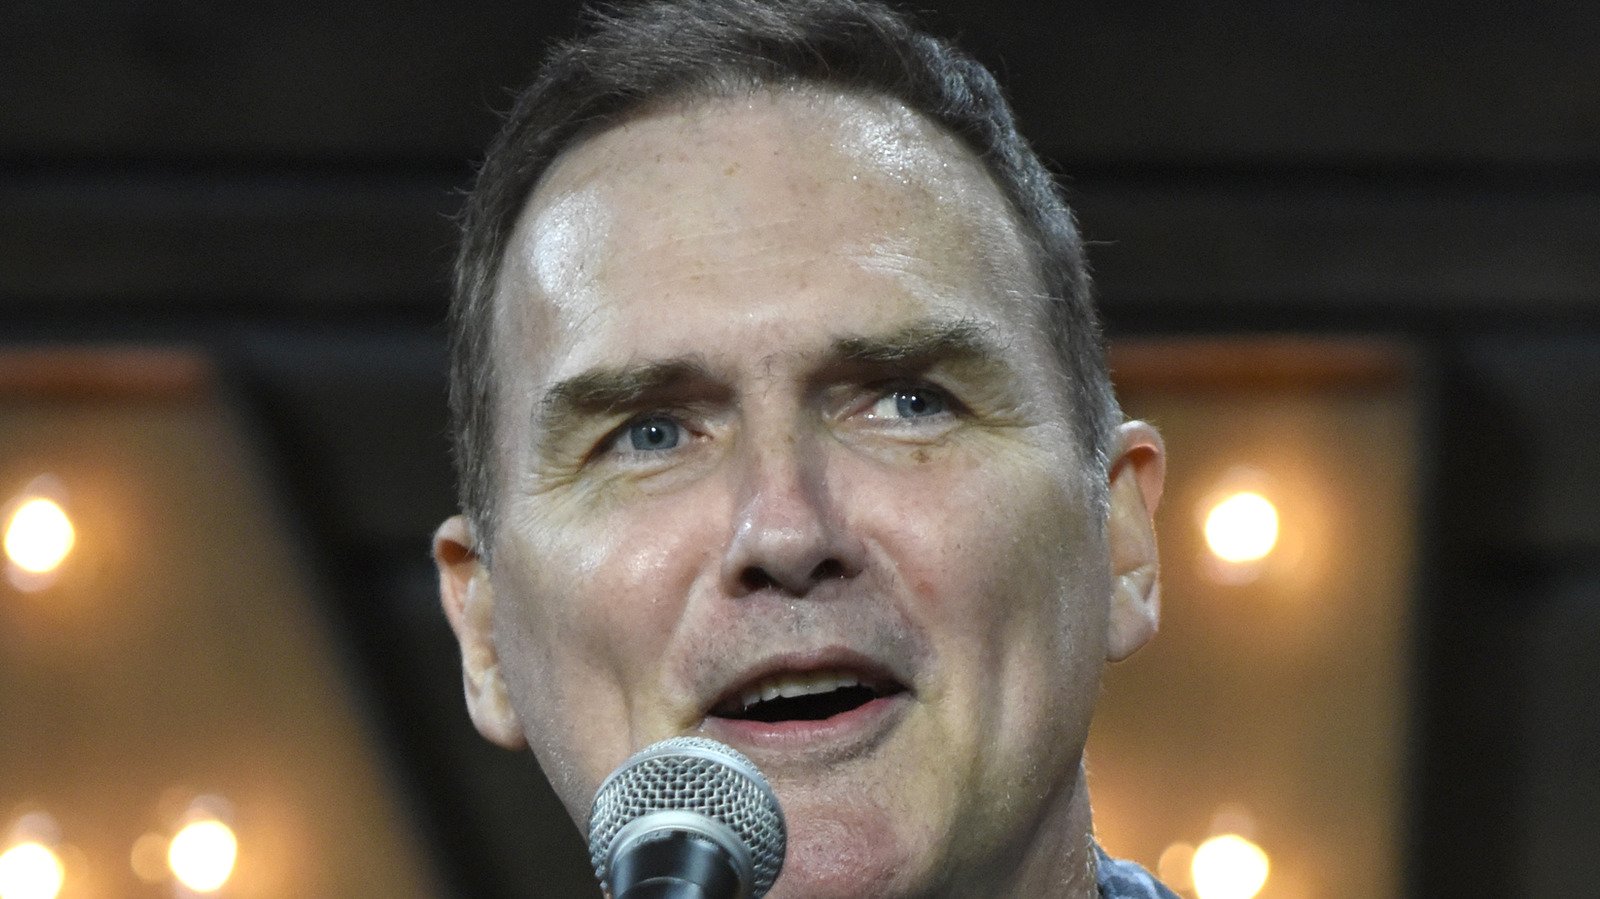 Norm Macdonald's Cancer Joke Has Much More Meaning Now